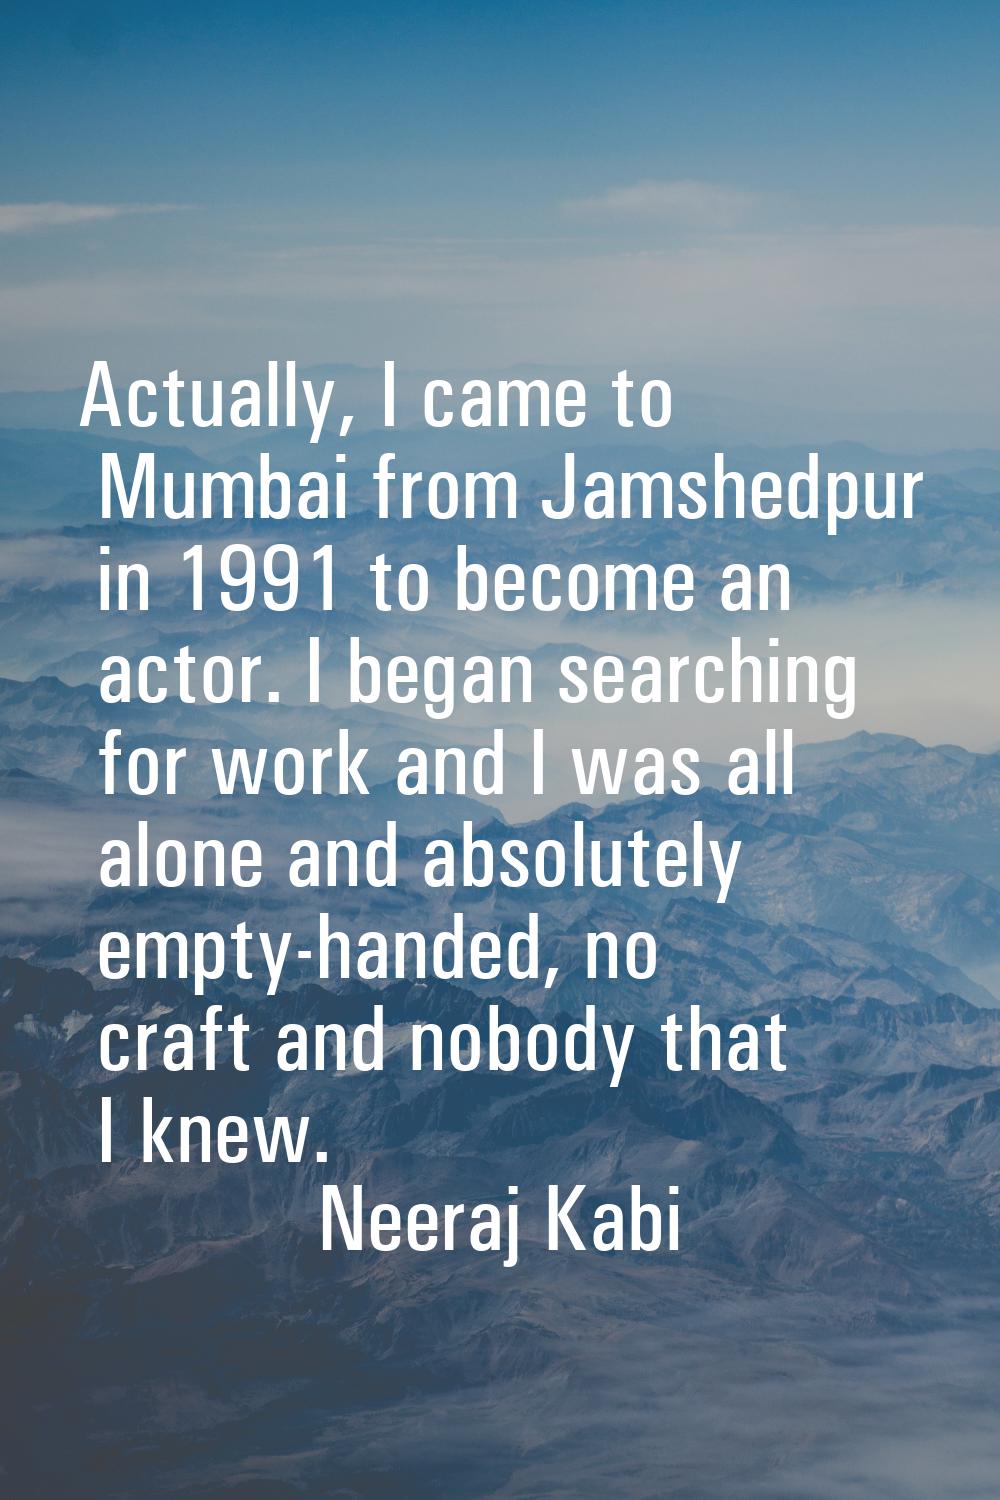 Actually, I came to Mumbai from Jamshedpur in 1991 to become an actor. I began searching for work a